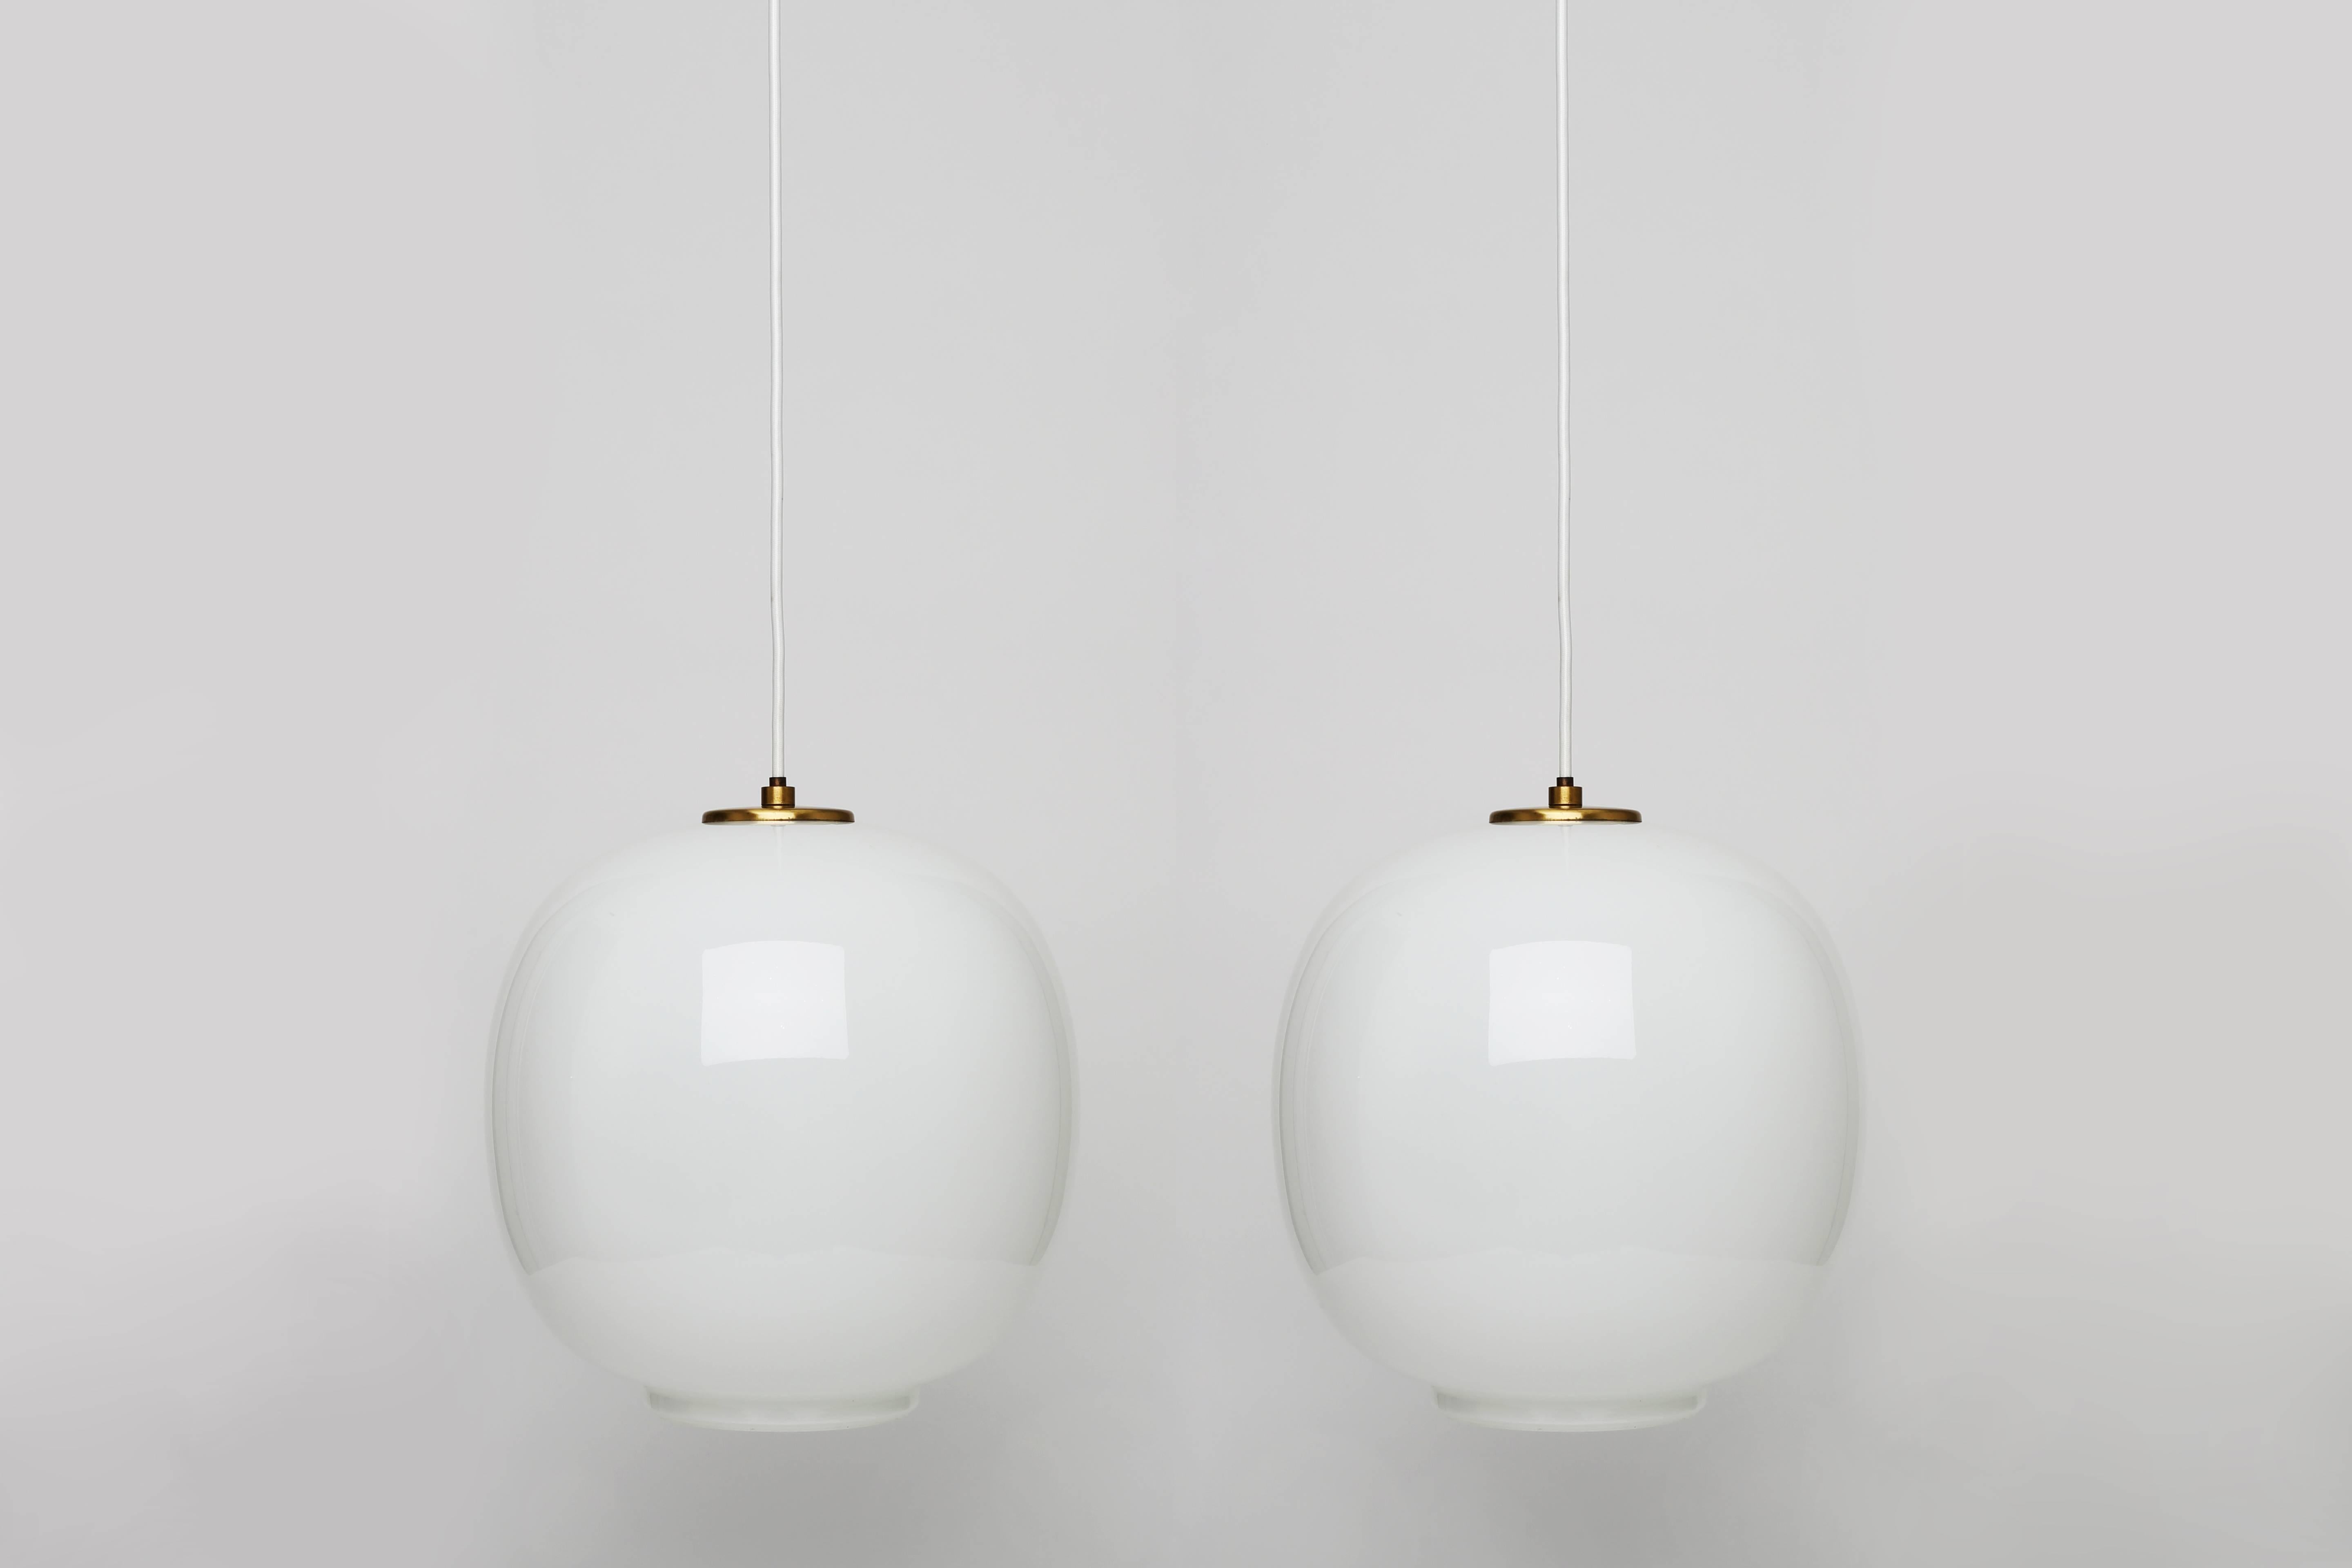 Pair of ceiling pendants by Vilhelm Lauritzen.
Designed by Danish architect Vilhelm Lauritzen for the broadcasting House in Copenhagen, Radiohouse.
Made by Louis Poulsen.
Handblown glass, brass mounts with beautiful patina.
Denmark 1940s.
Also